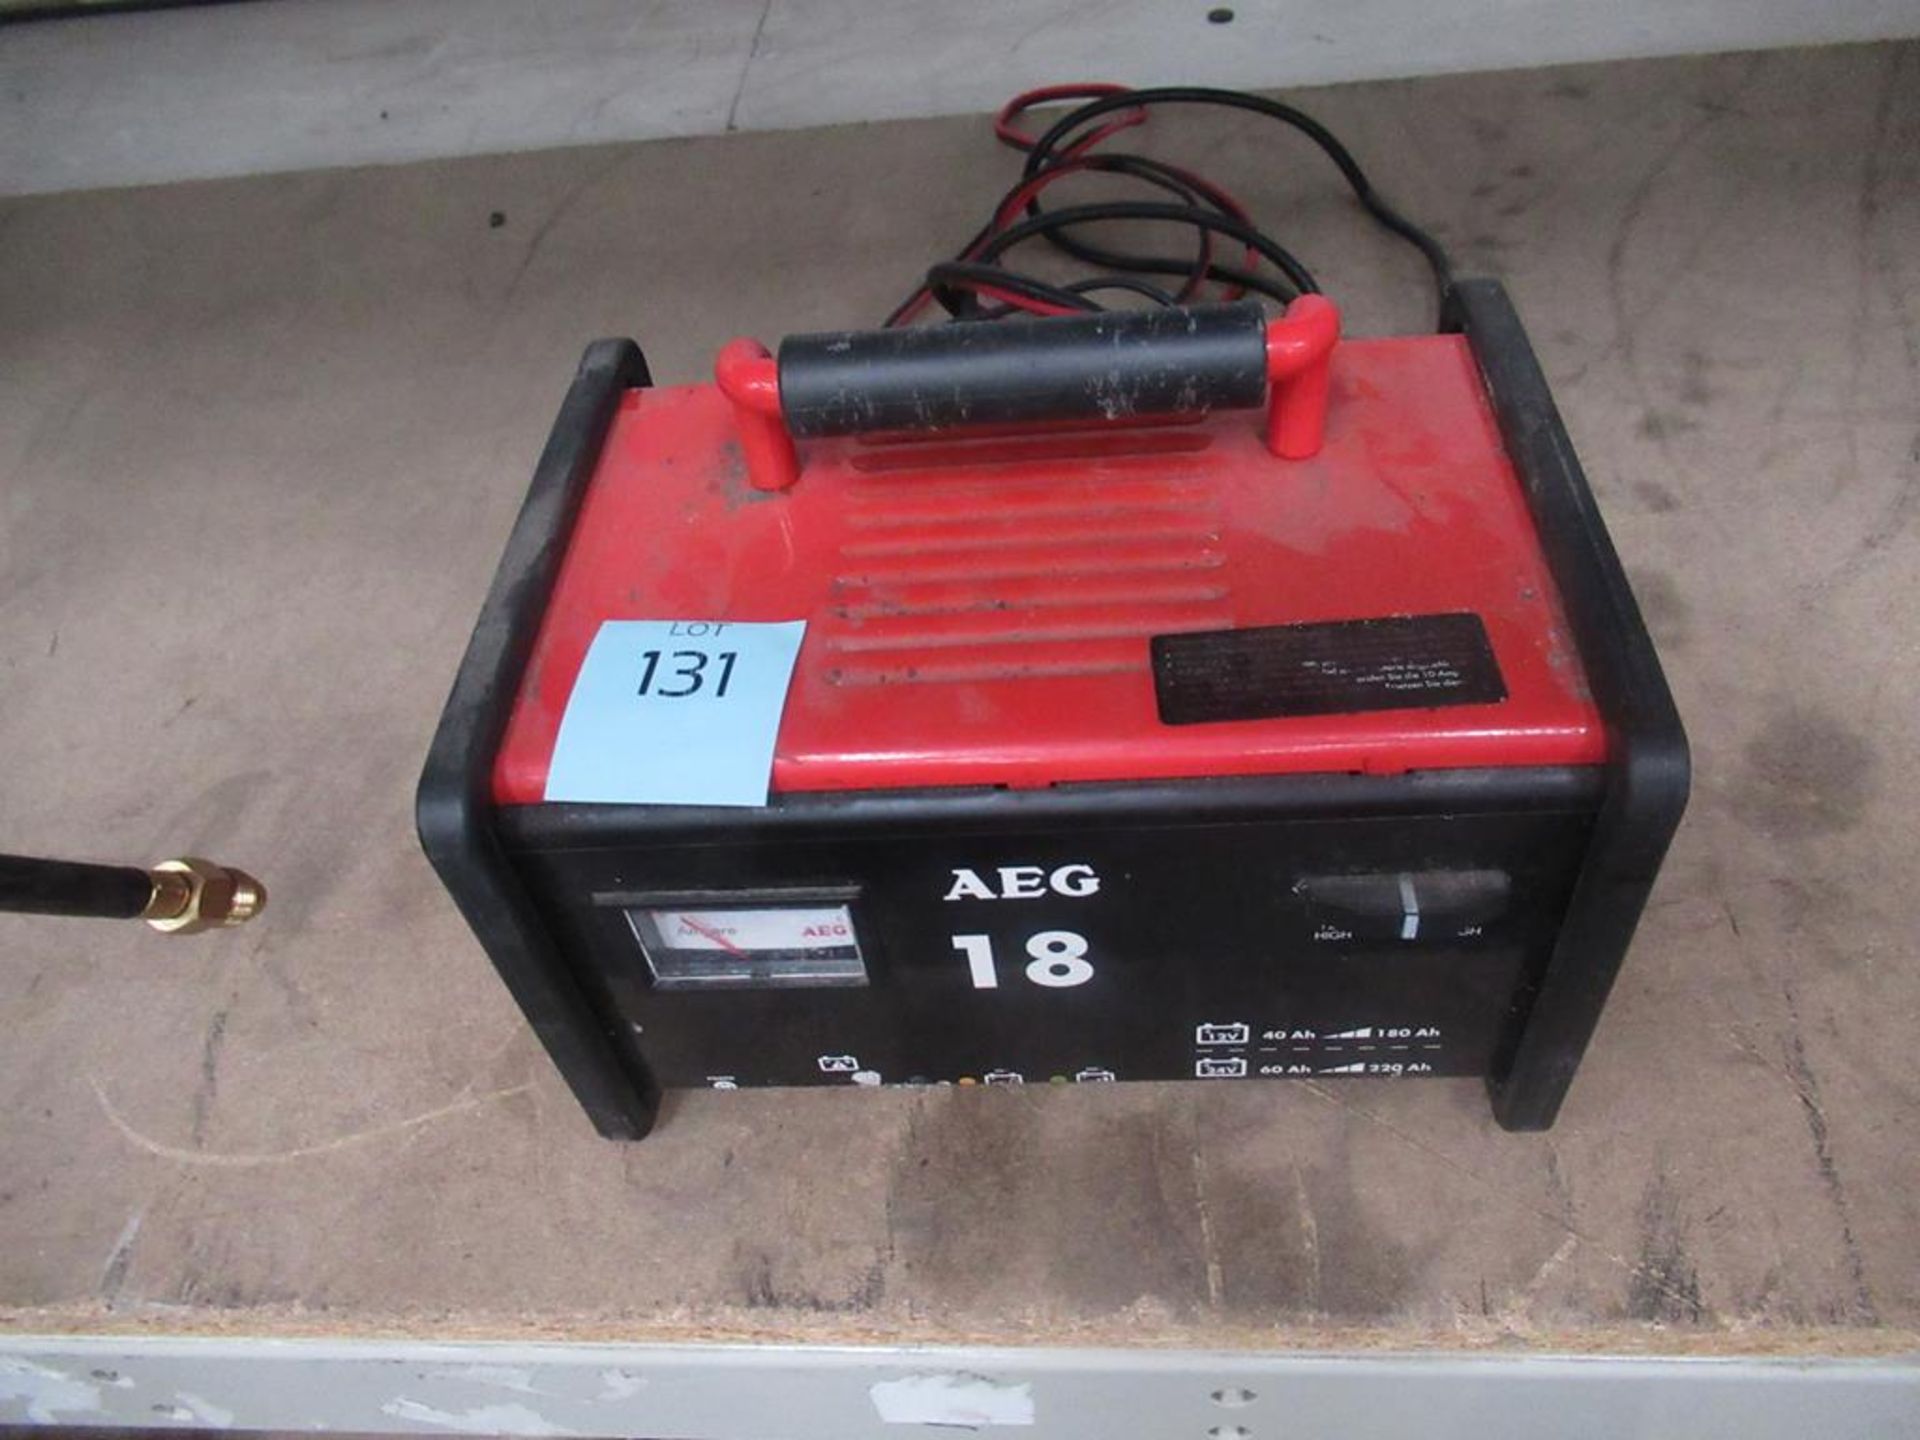 AEG 18 battery charger